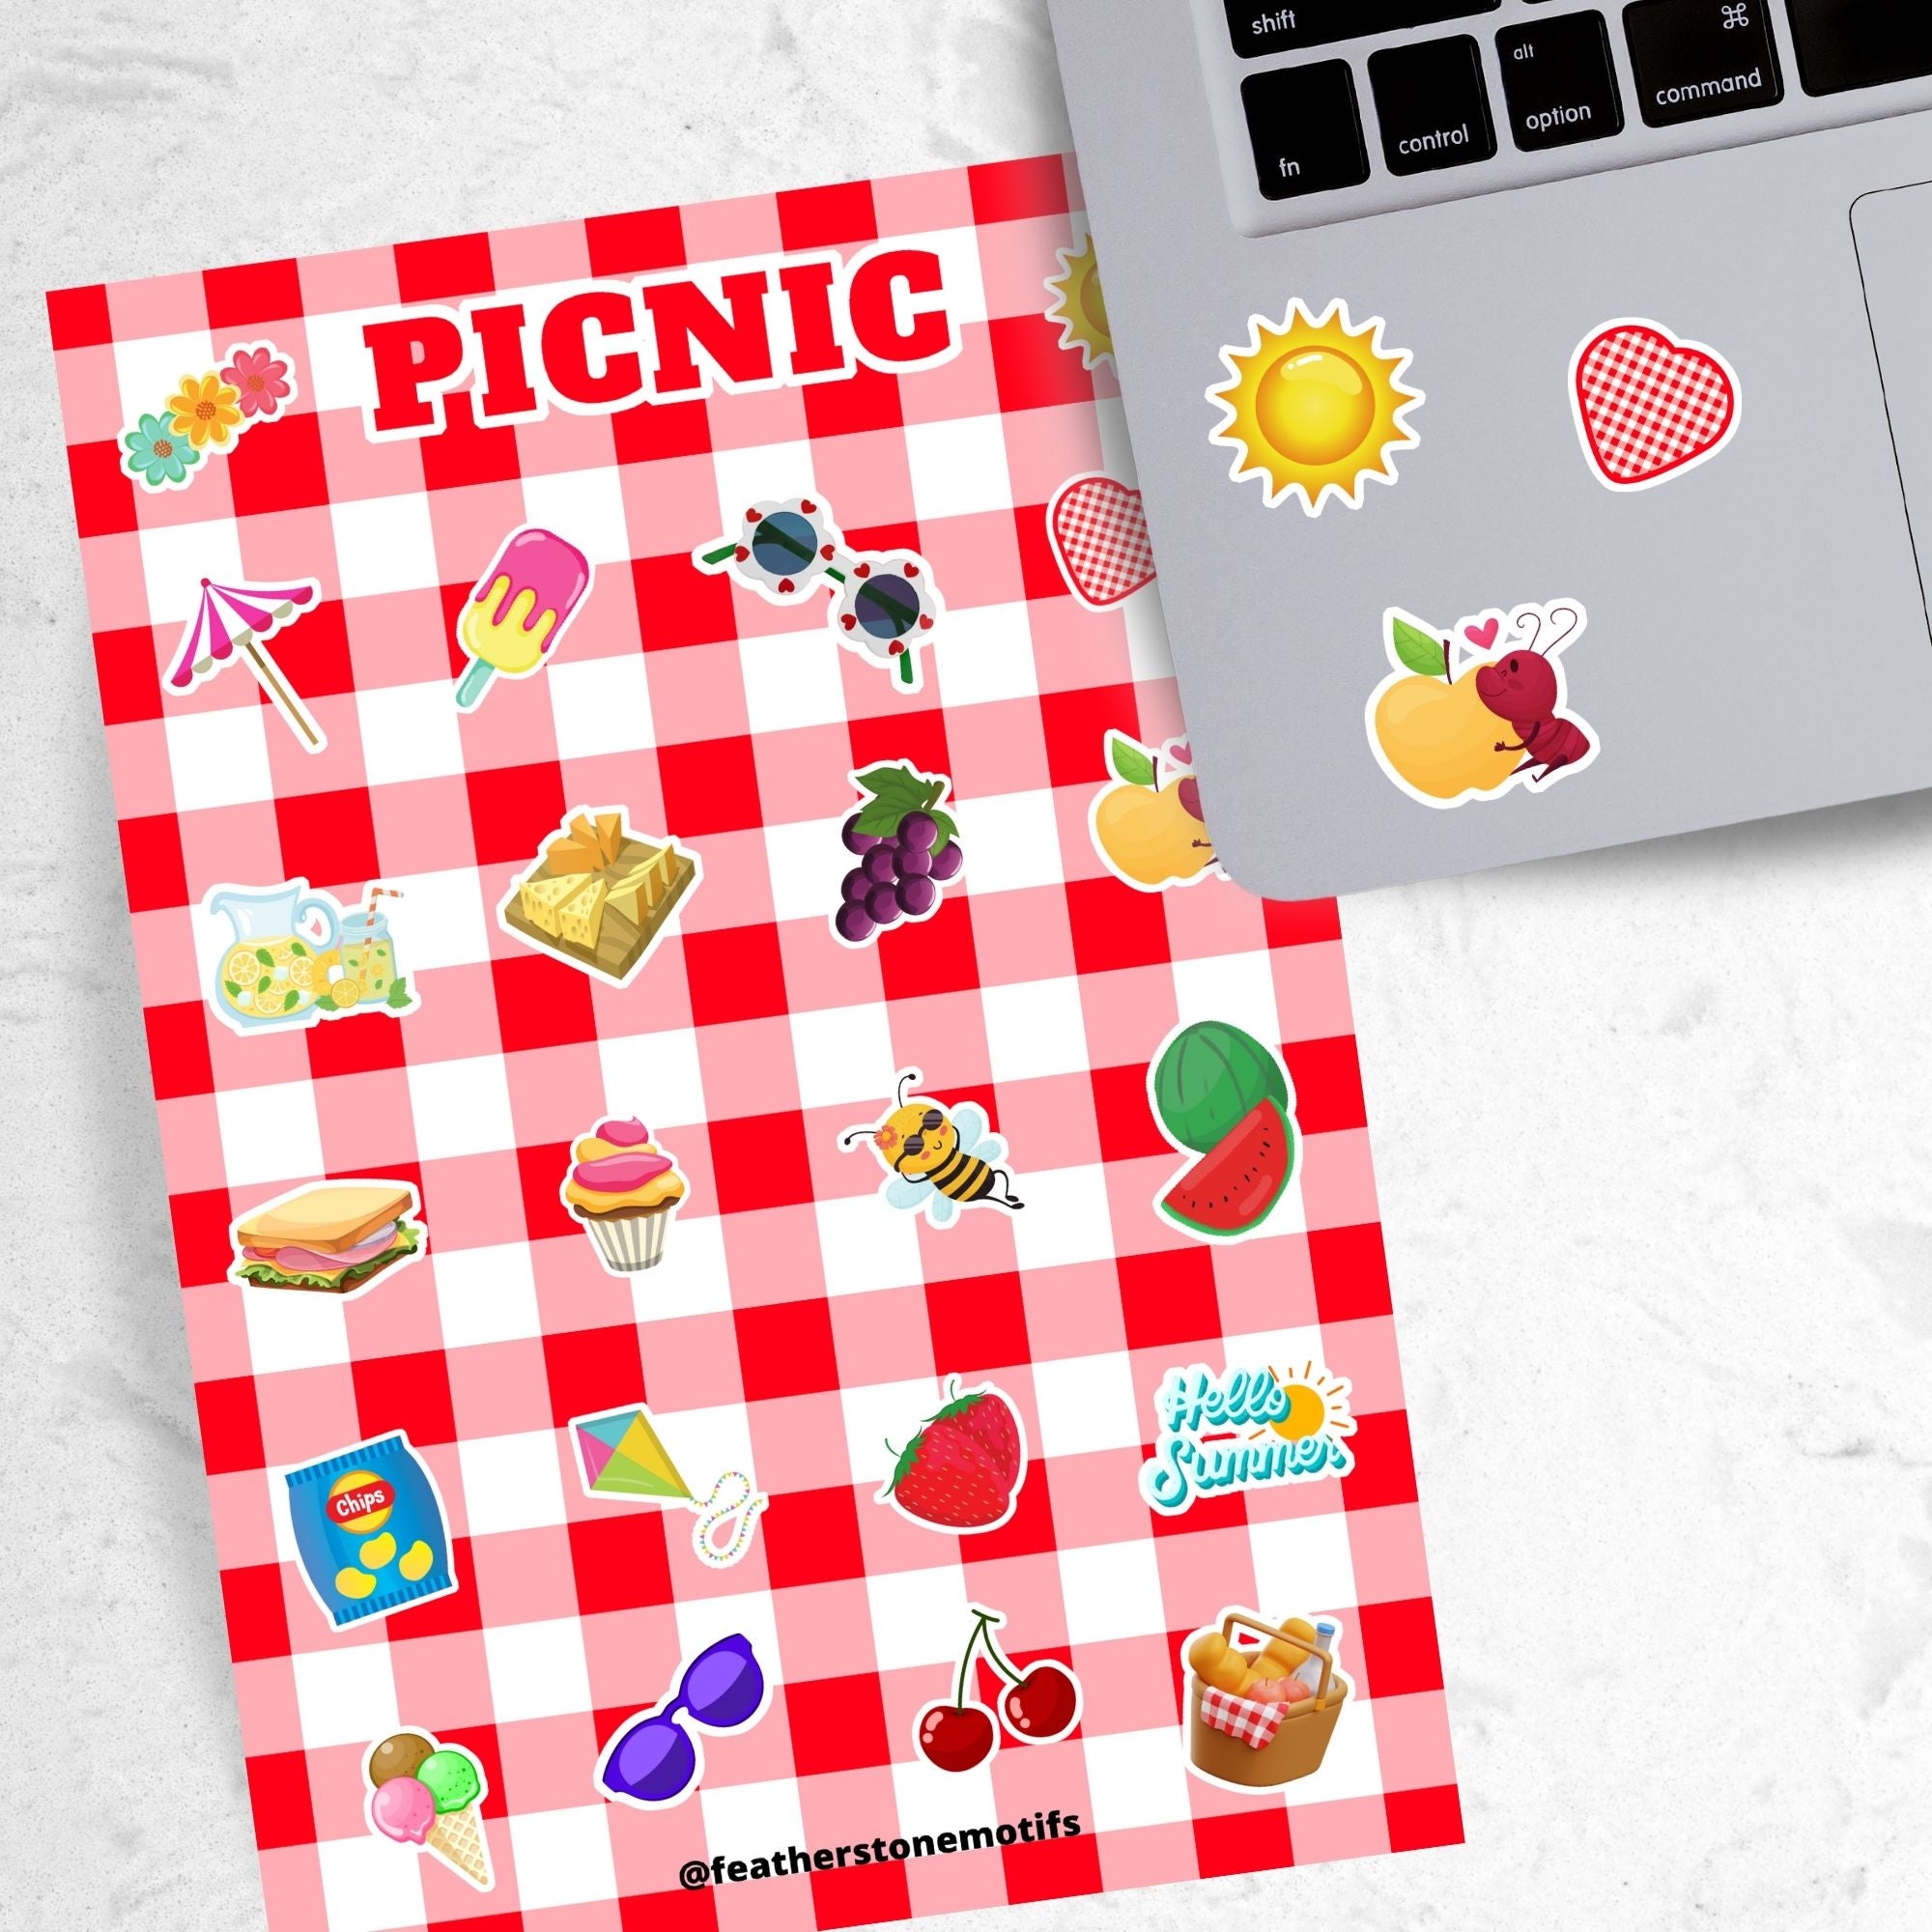 Pack the picnic basket and grab a blanket; we're going on a picnic! This sticker sheet has sticker images of all your favorite picnic foods and activities like sandwiches, fruit, ice cream, and lemonade all on a red and white checked tablecloth background. This image shows the sticker sheet next to an open laptop with stickers of the sun, a red and white checked heart, and an ant holding a yellow apple, applied below the keyboard.